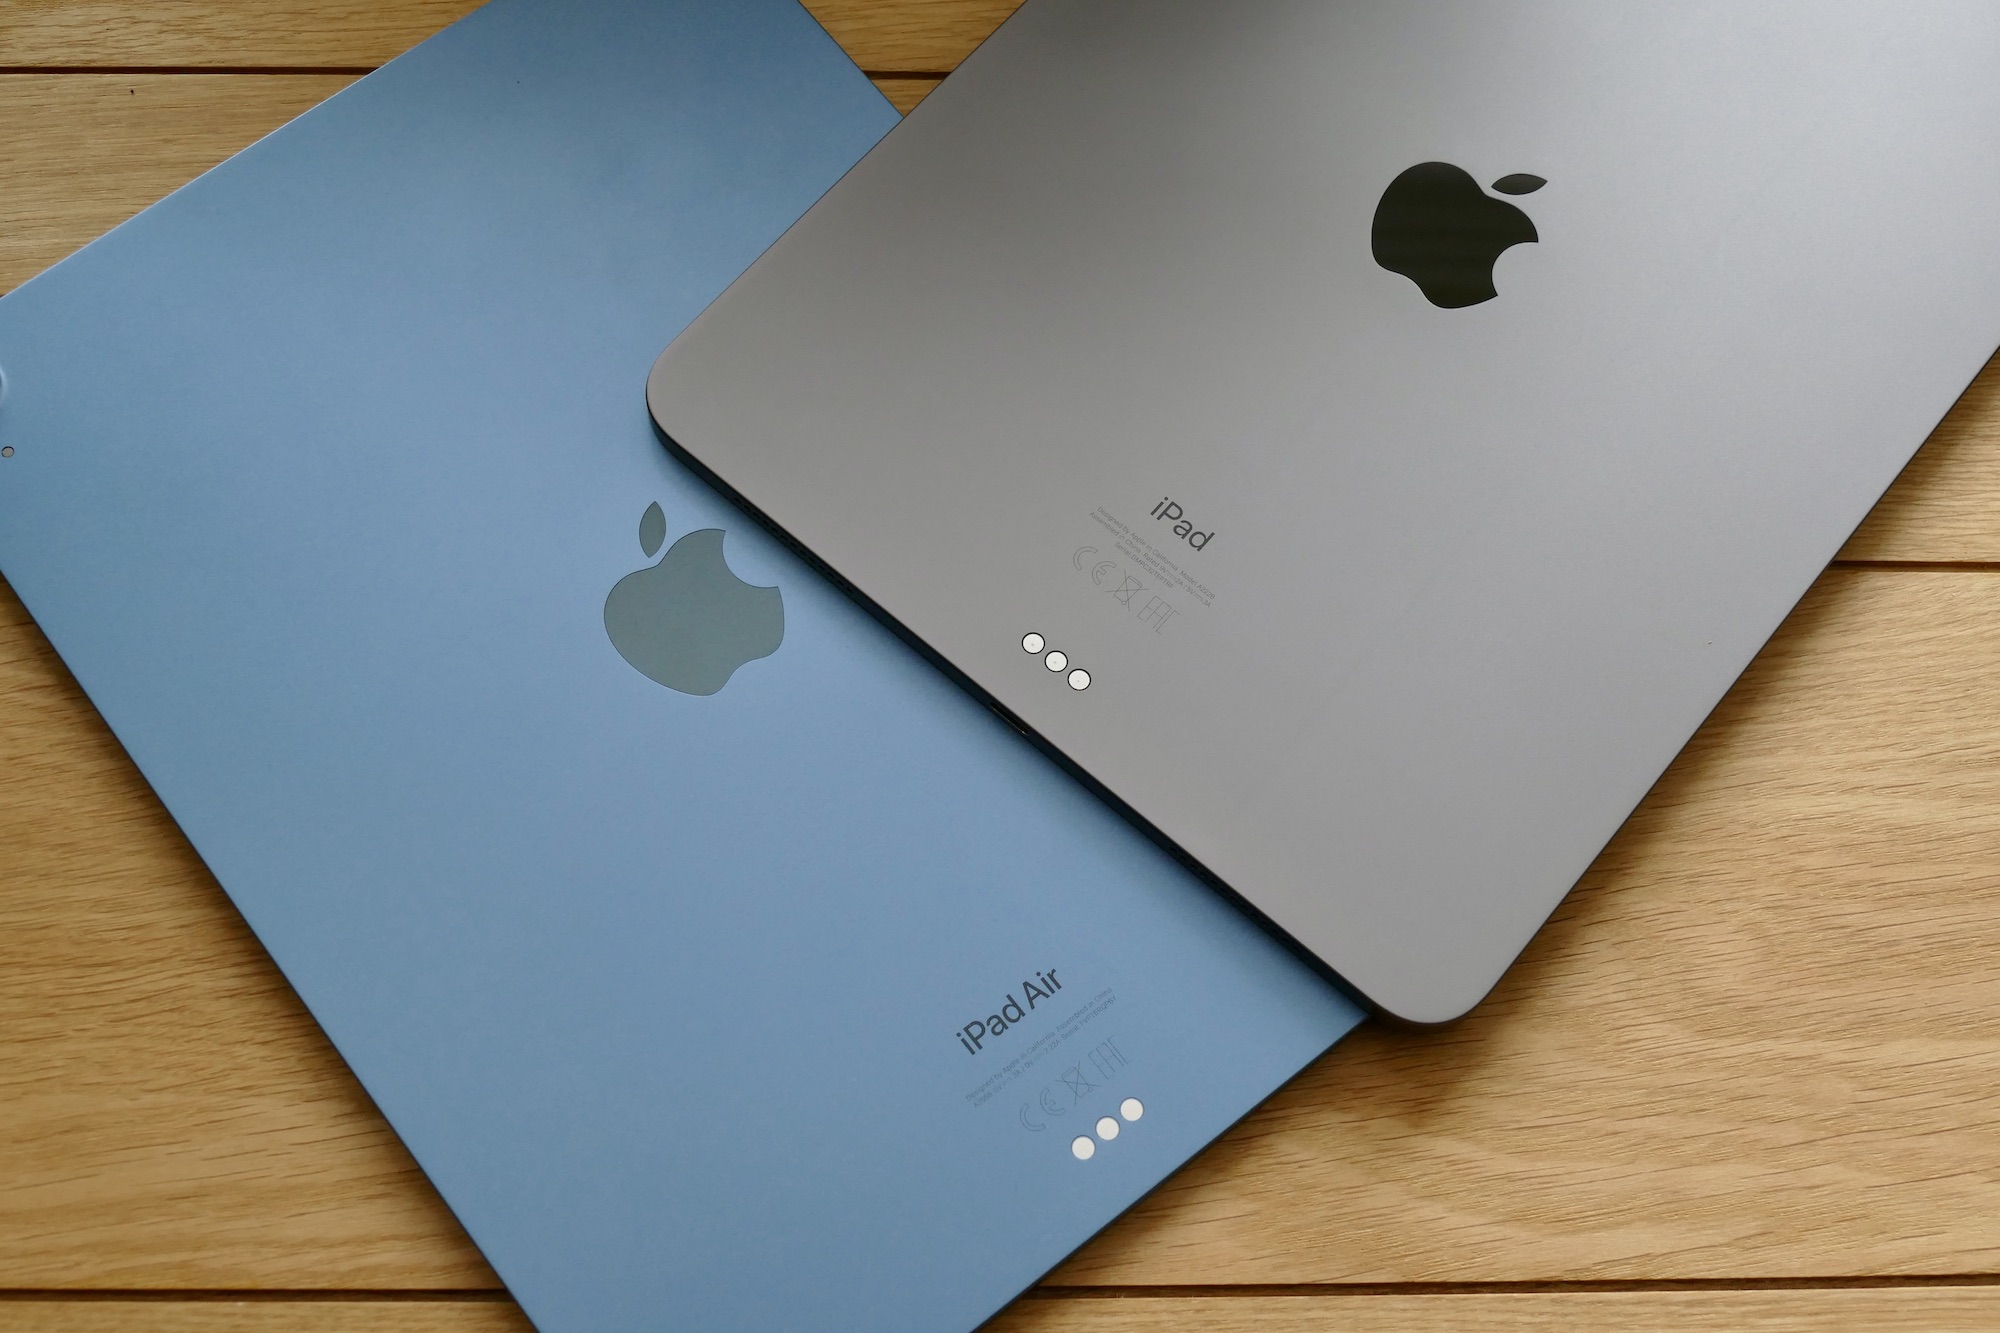 iPad Air 1 review: Sleek, fast and amazingly lightweight tablet